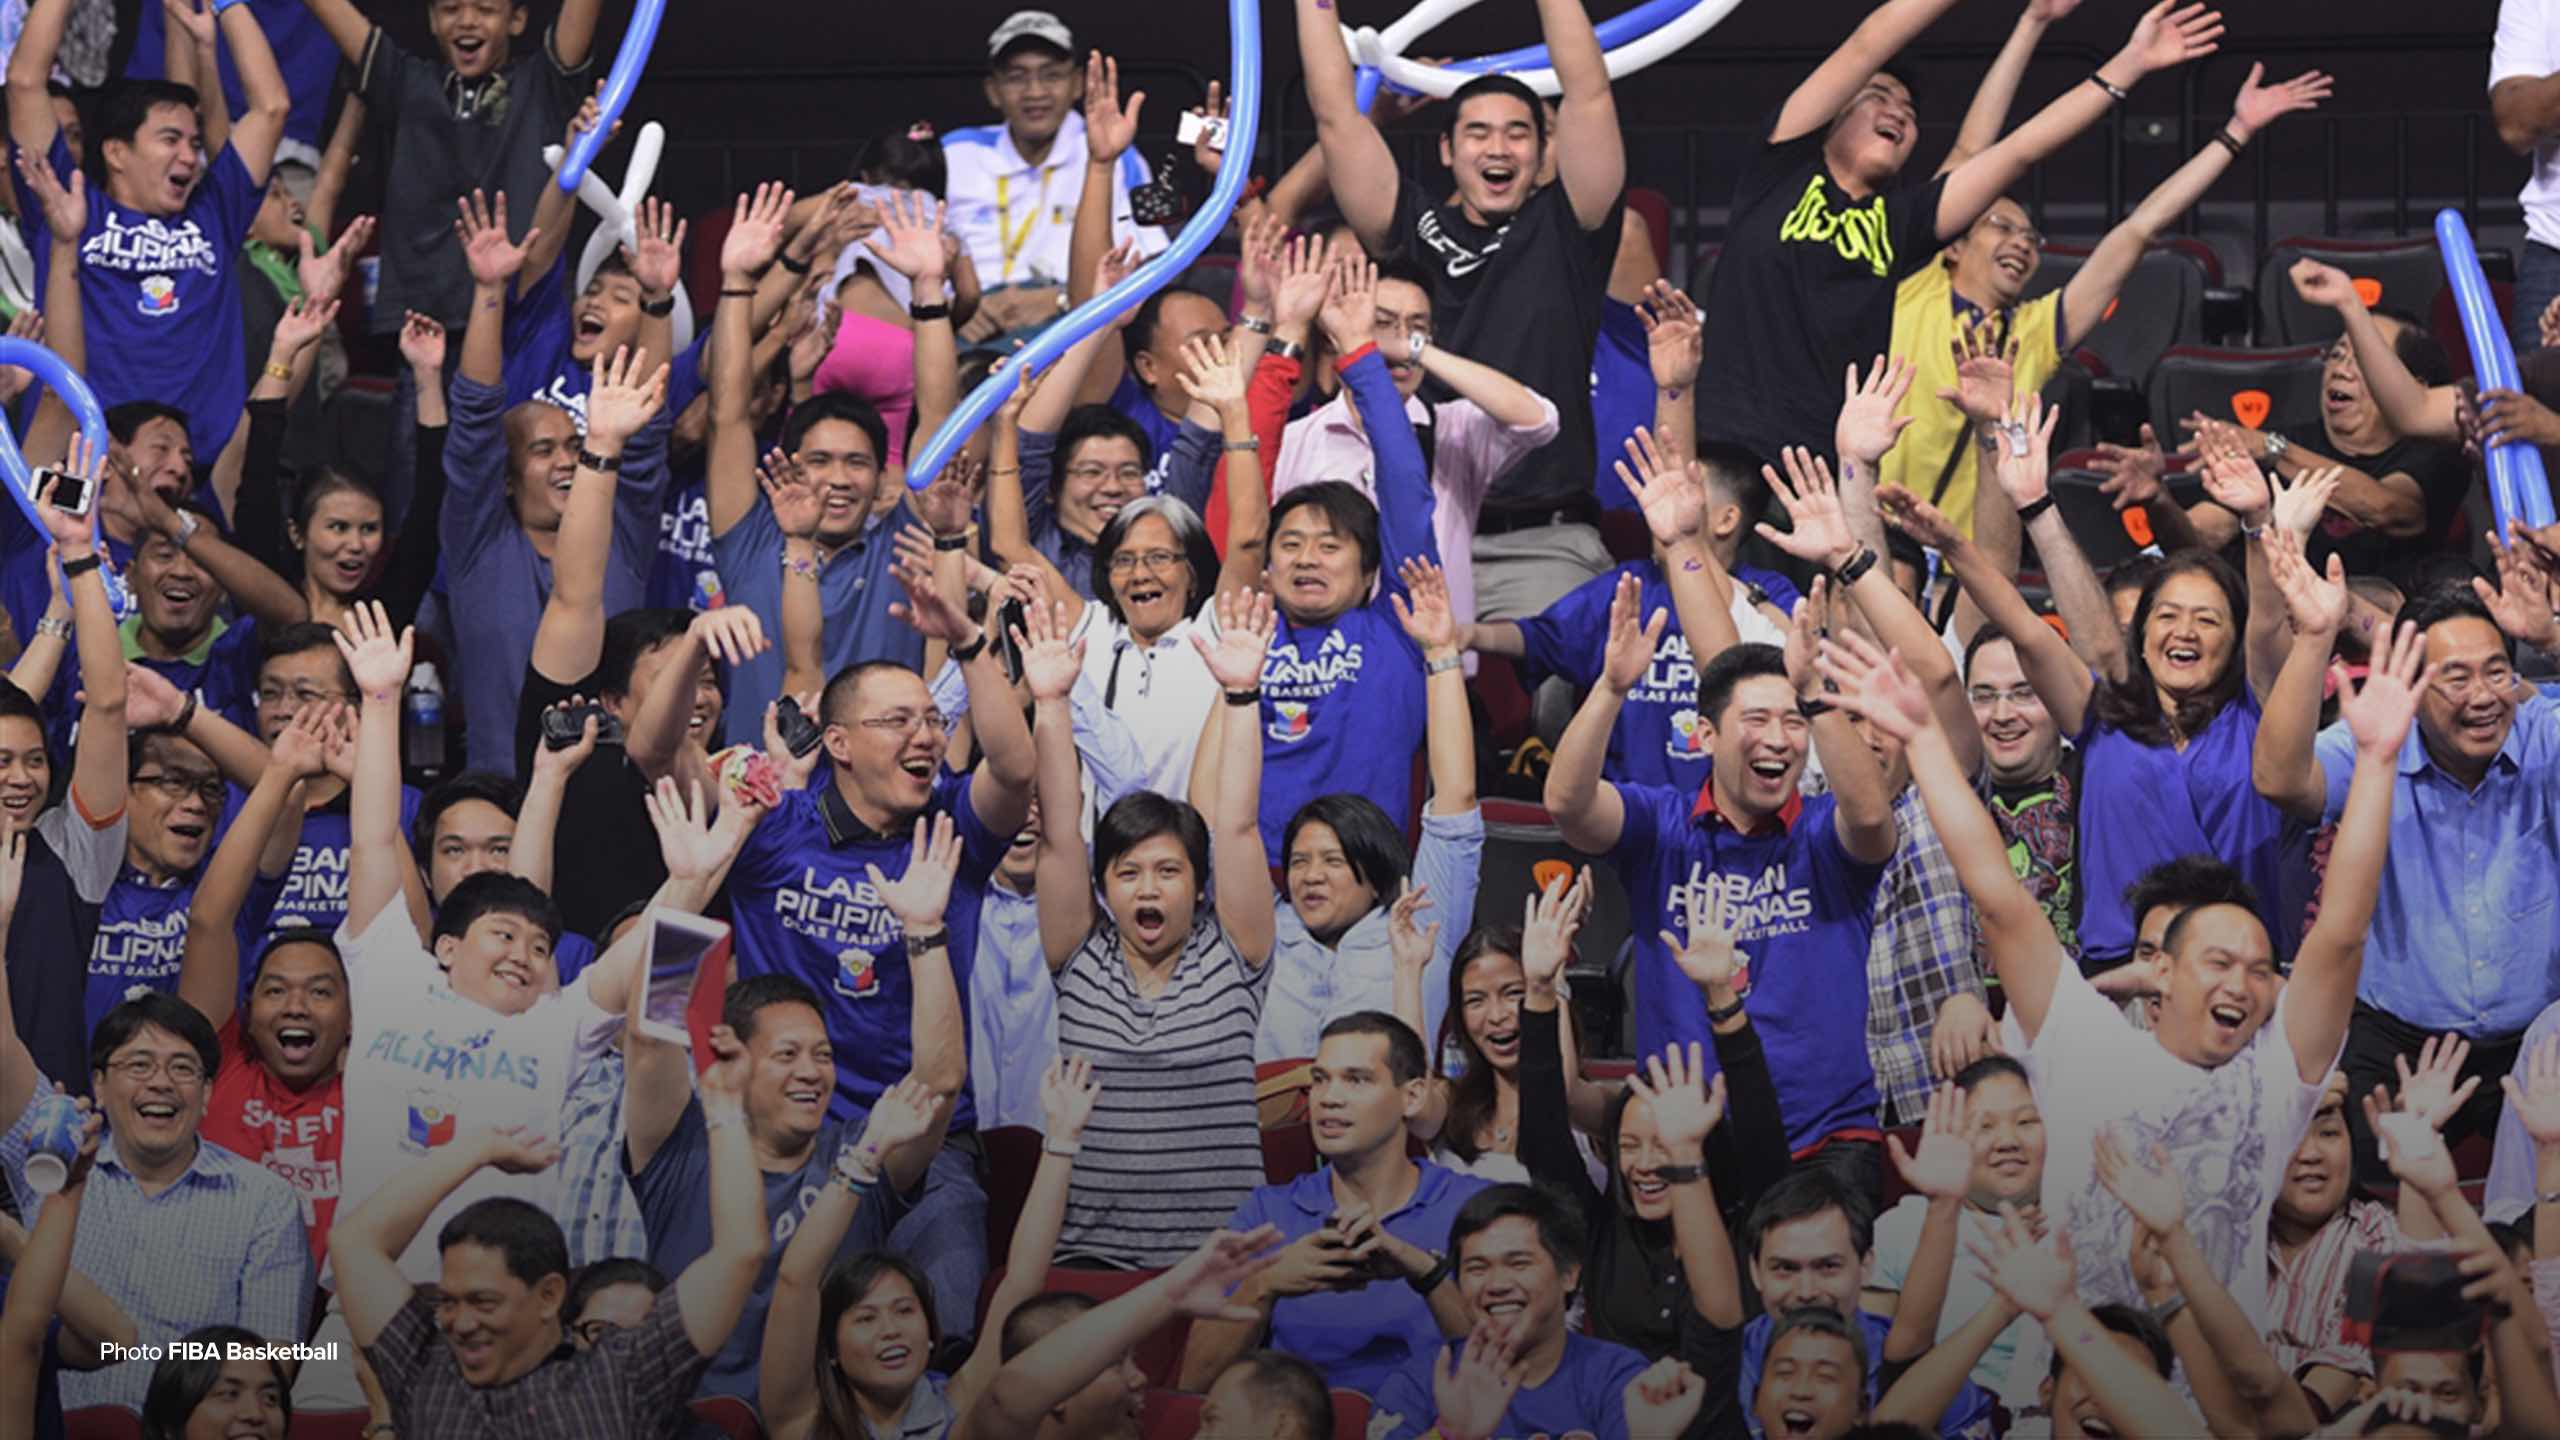 Fans at the Gilas game